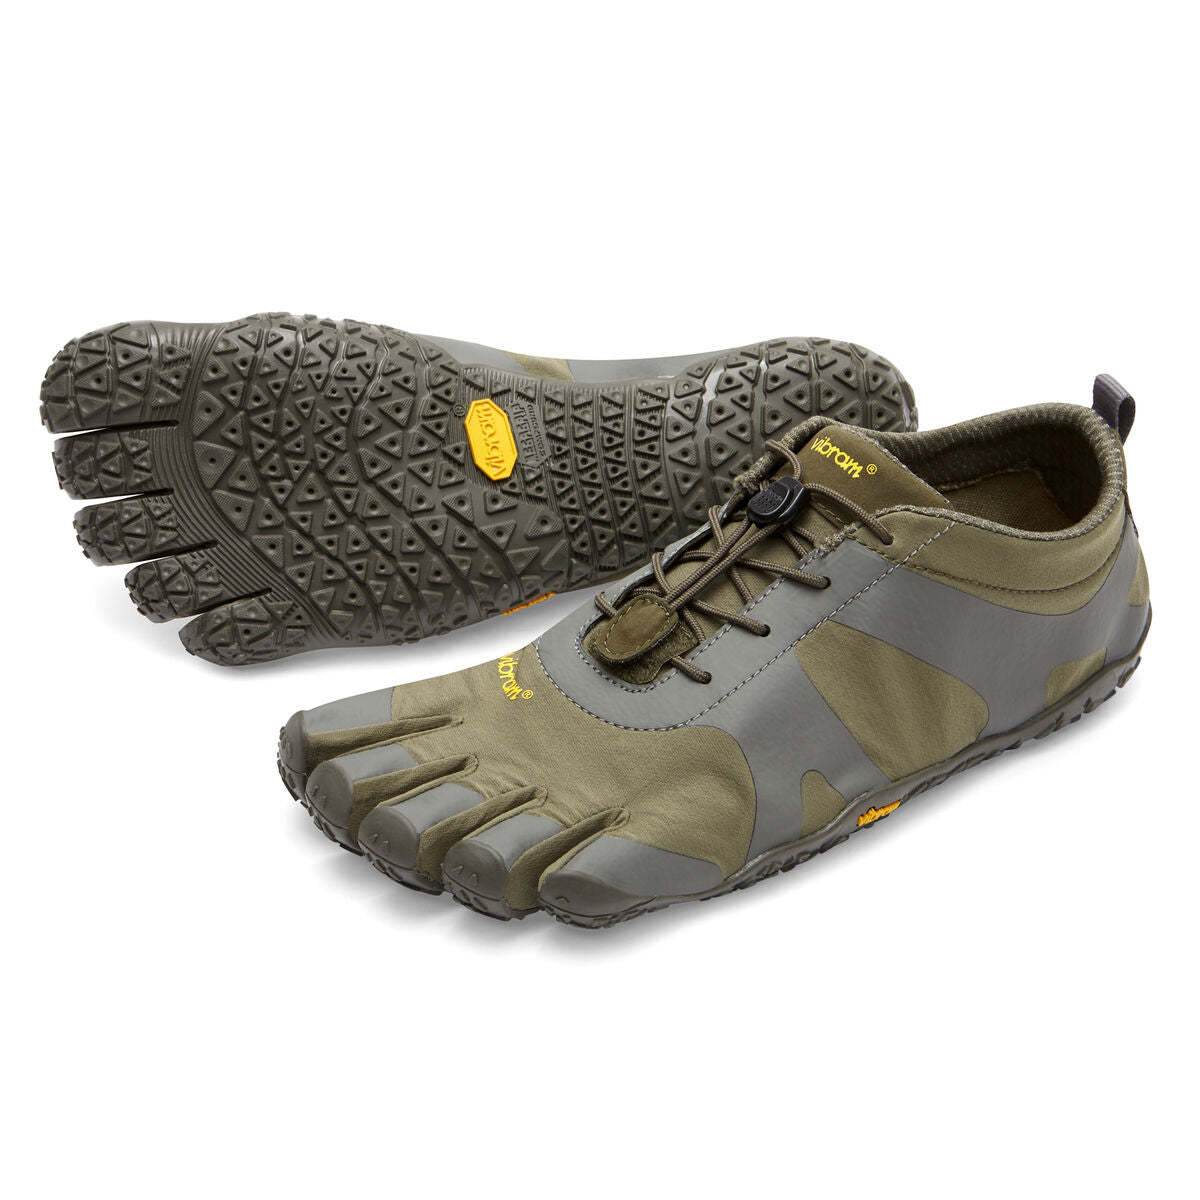 Men's Vibram Five Fingers V-Alpha Hiking Shoe in Military from the front